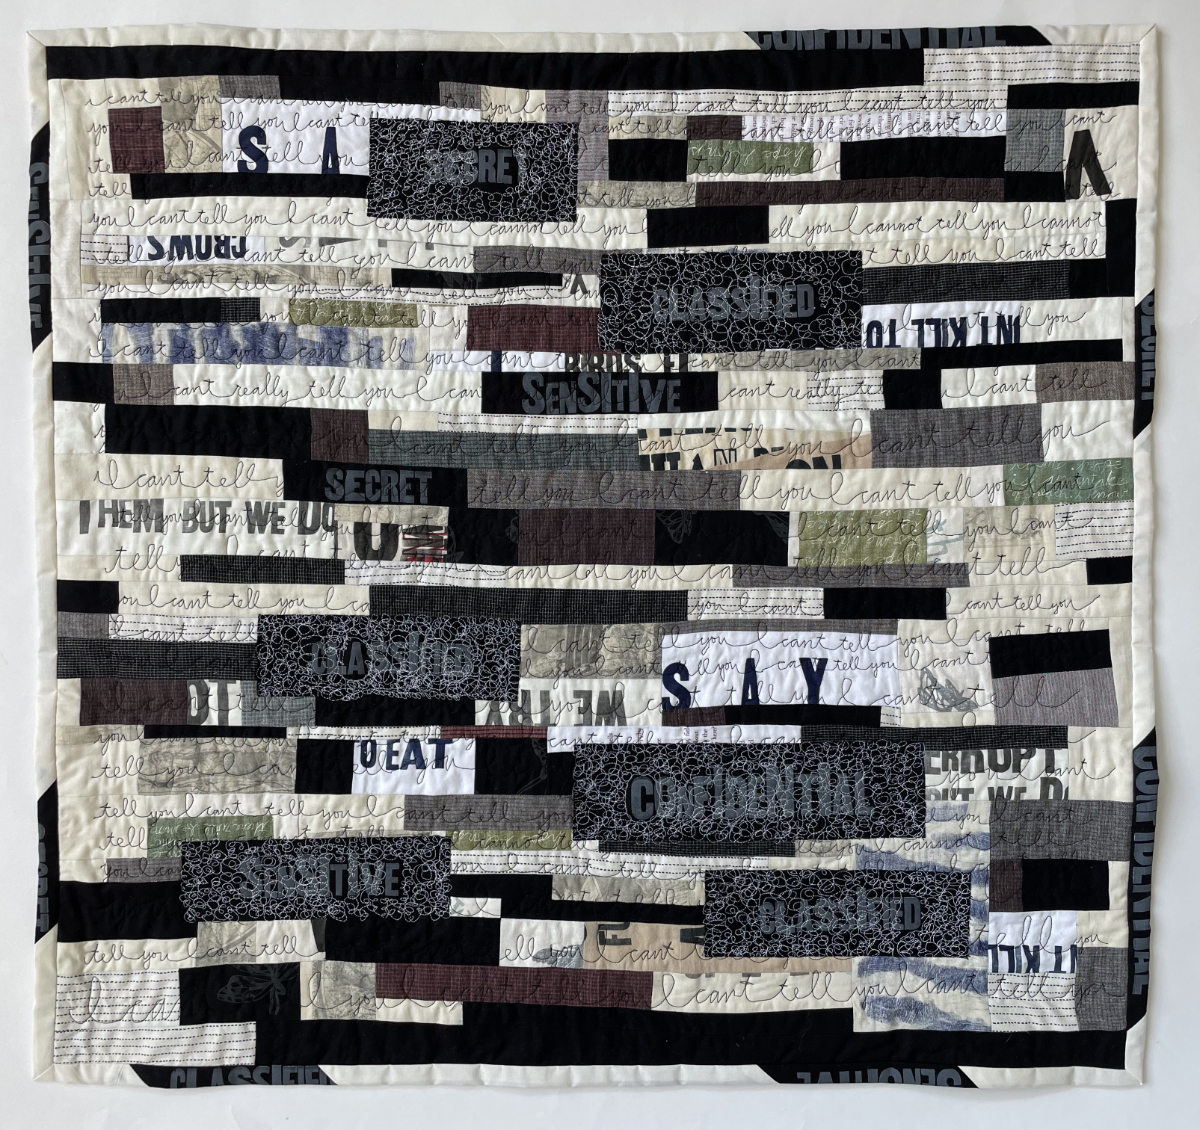 pieced horizontal strip quilt with various textures and printed words crossed out and free motion quilting of the words I can't tell you